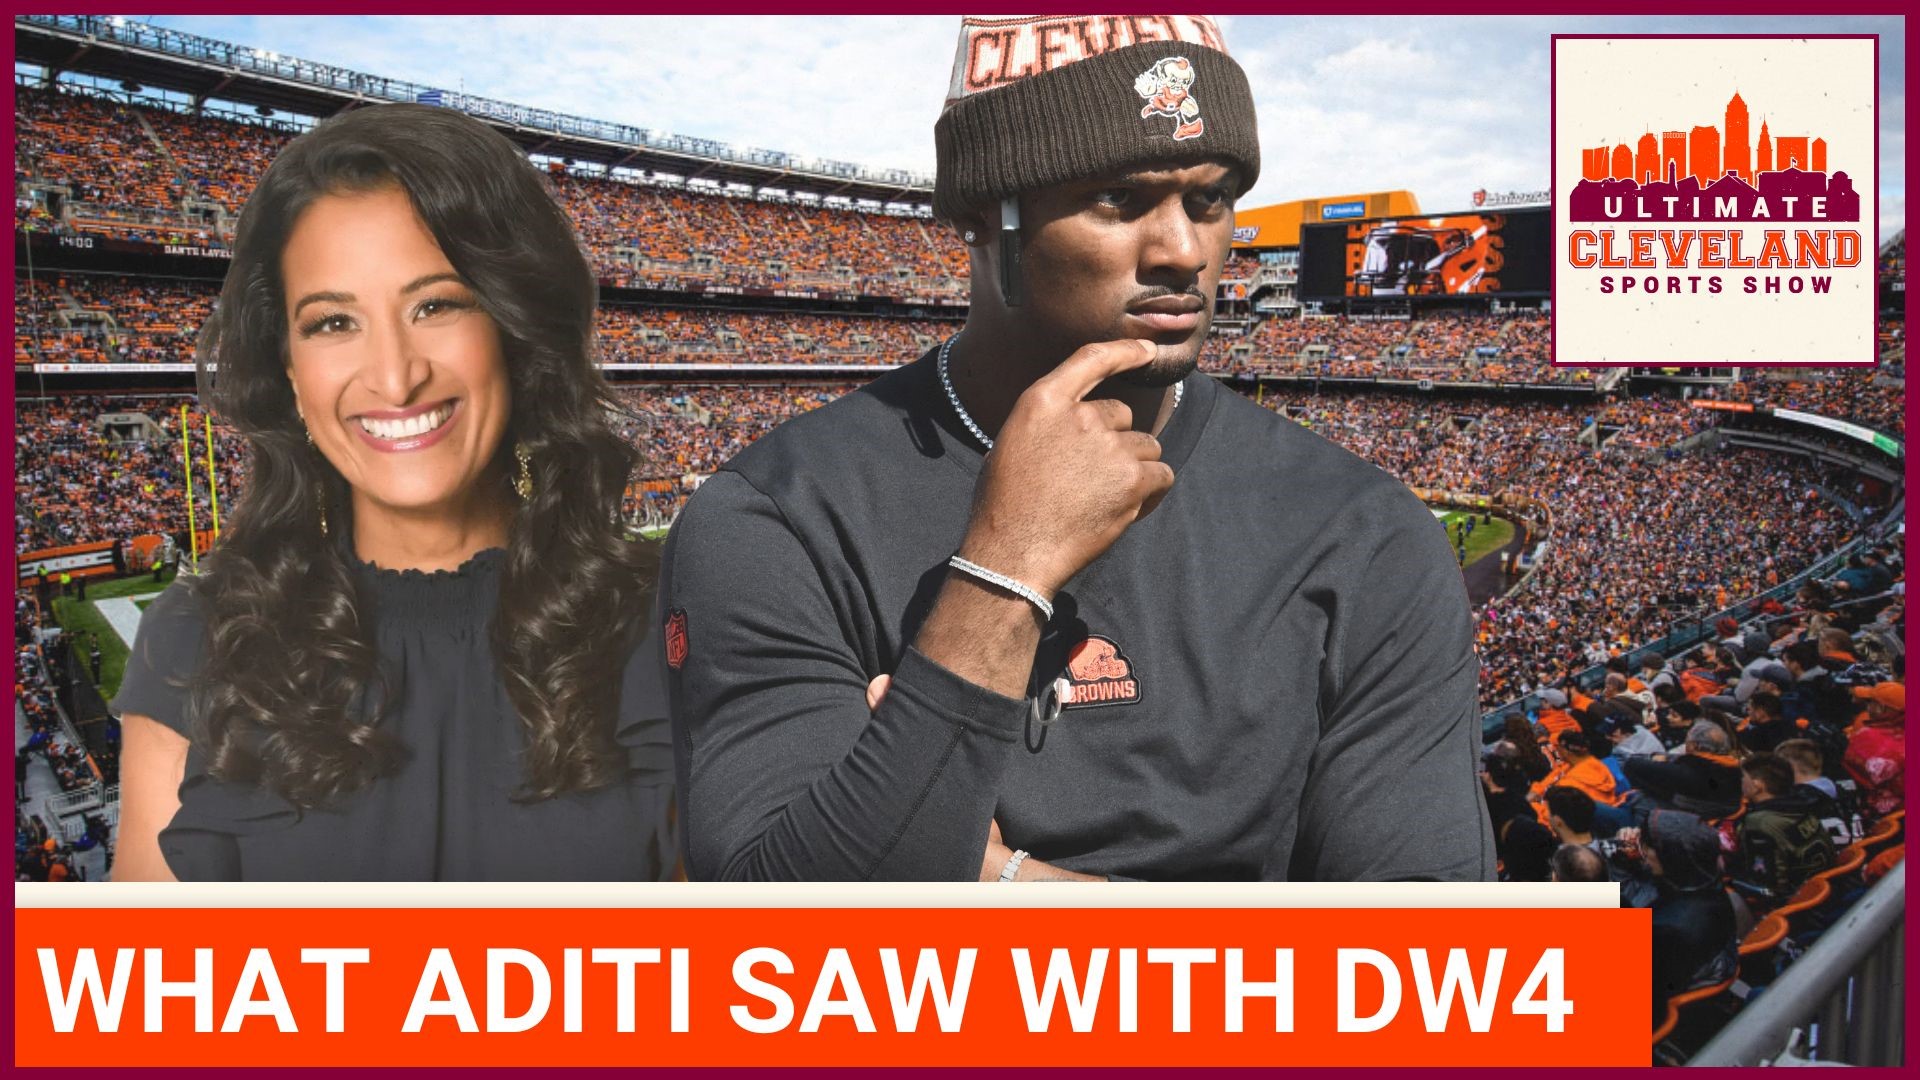 Aditi Kinkhabwala joins UCSS and gives details on what happened in Indy and shuts down speculation about Deshaun Watson's toughness